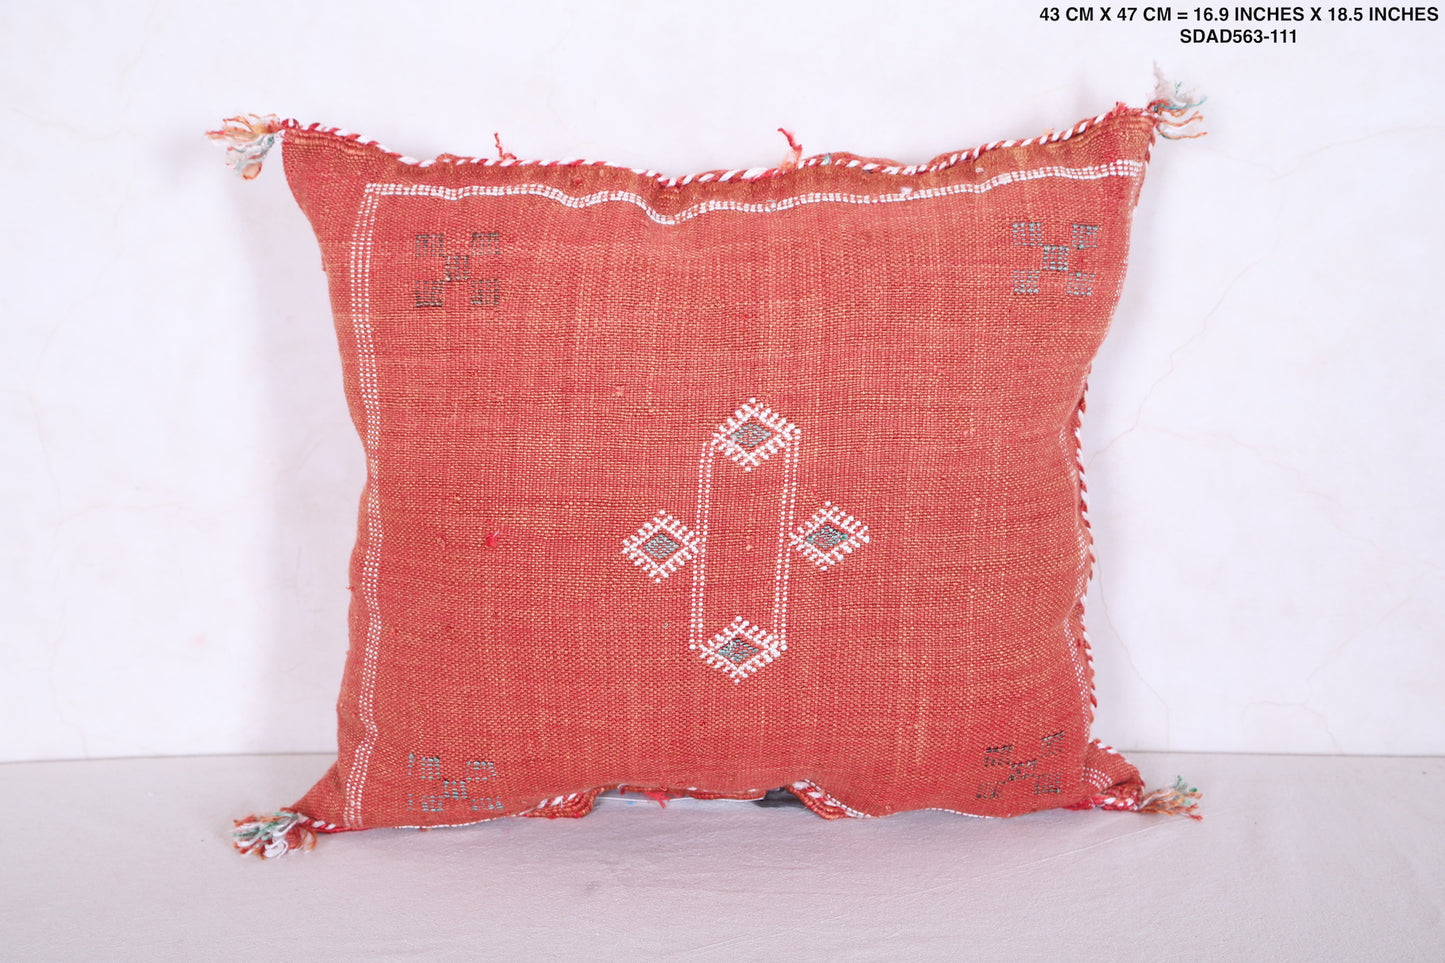 Moroccan handmade kilim pillow 16.9 INCHES X 18.5 INCHES